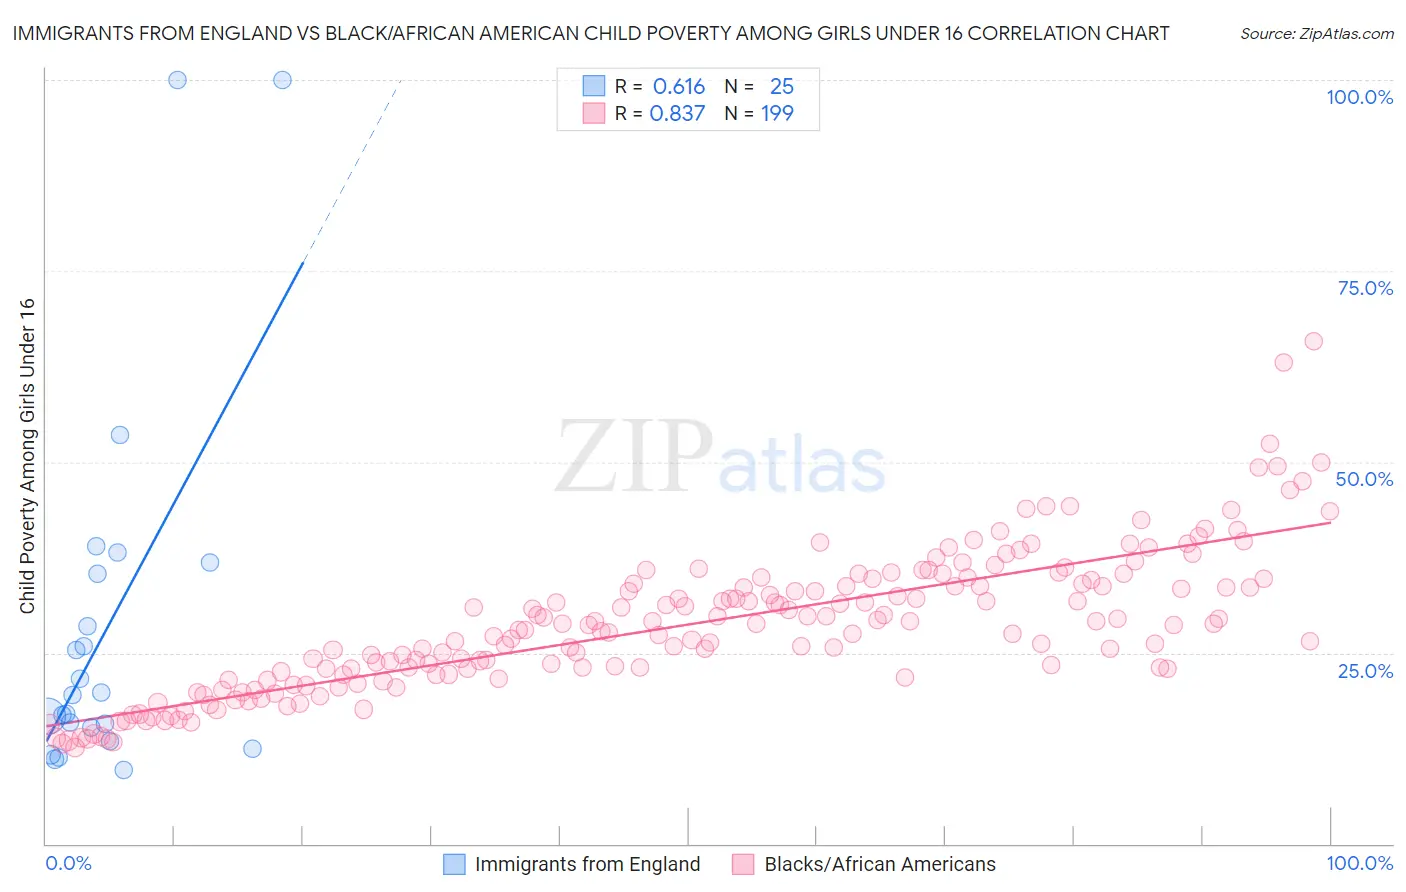 Immigrants from England vs Black/African American Child Poverty Among Girls Under 16